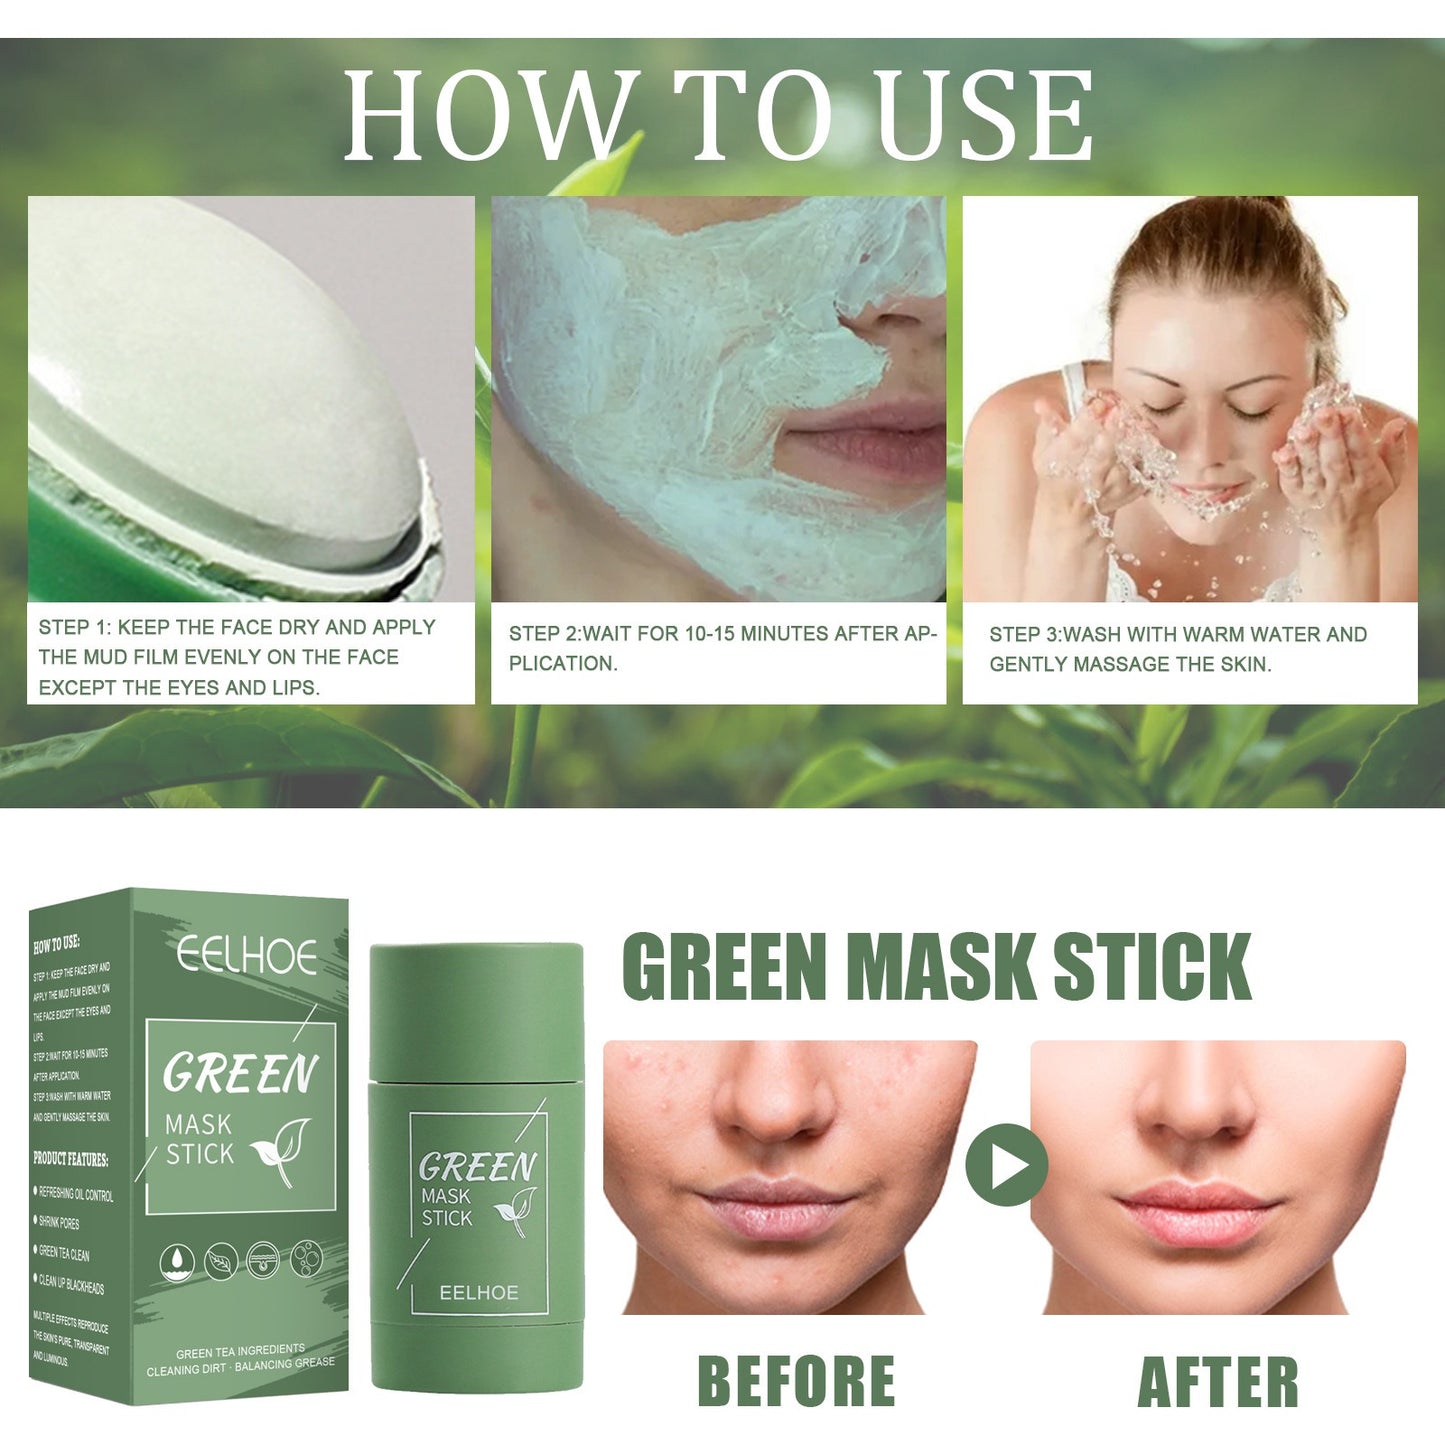 EELHOE Green Tea Solid Mask Deep Cleansing and Hydrating Mask